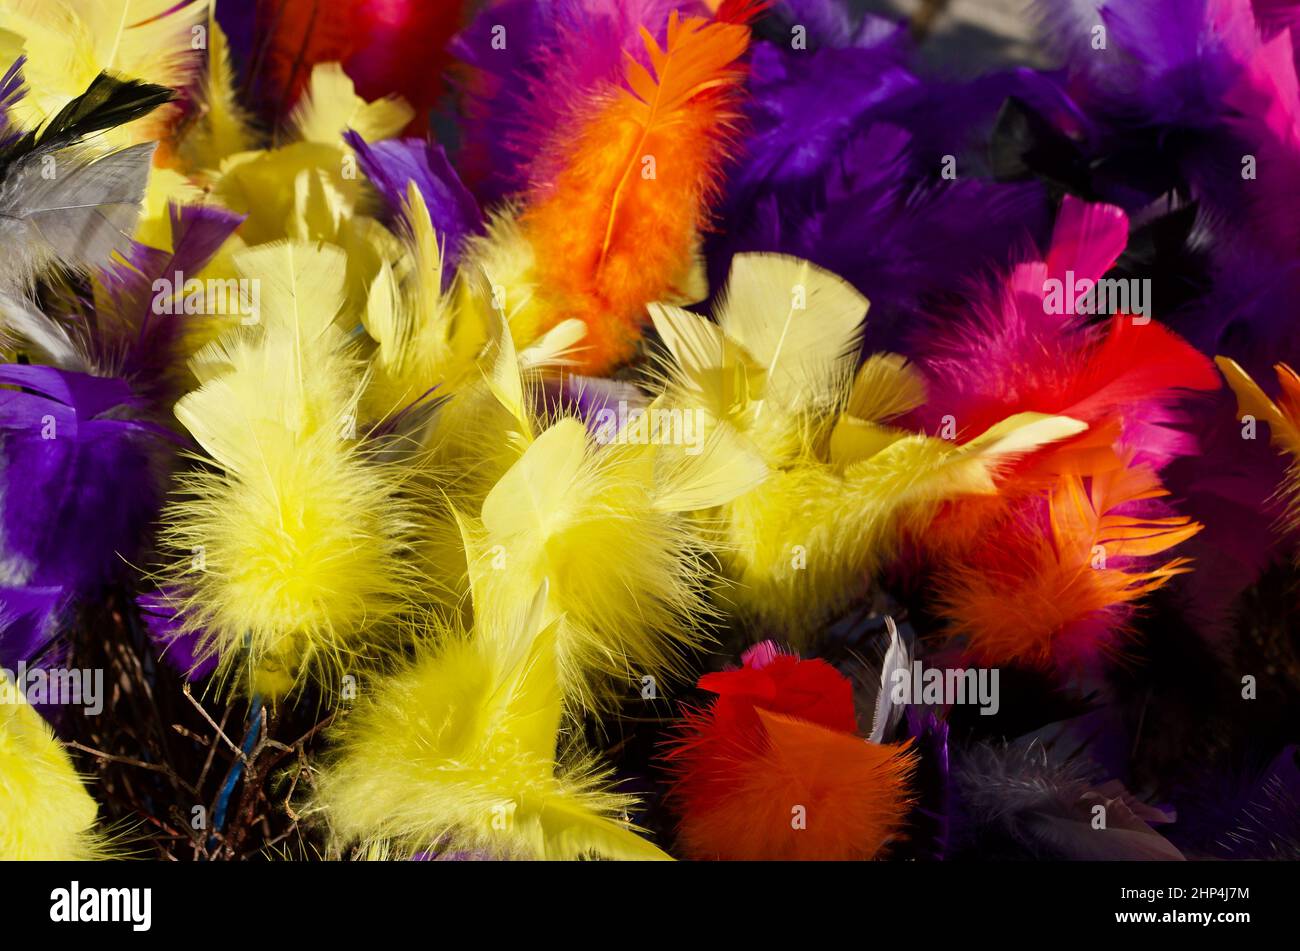 Birch twigs with feathers in yellow and other colors as decoration ...